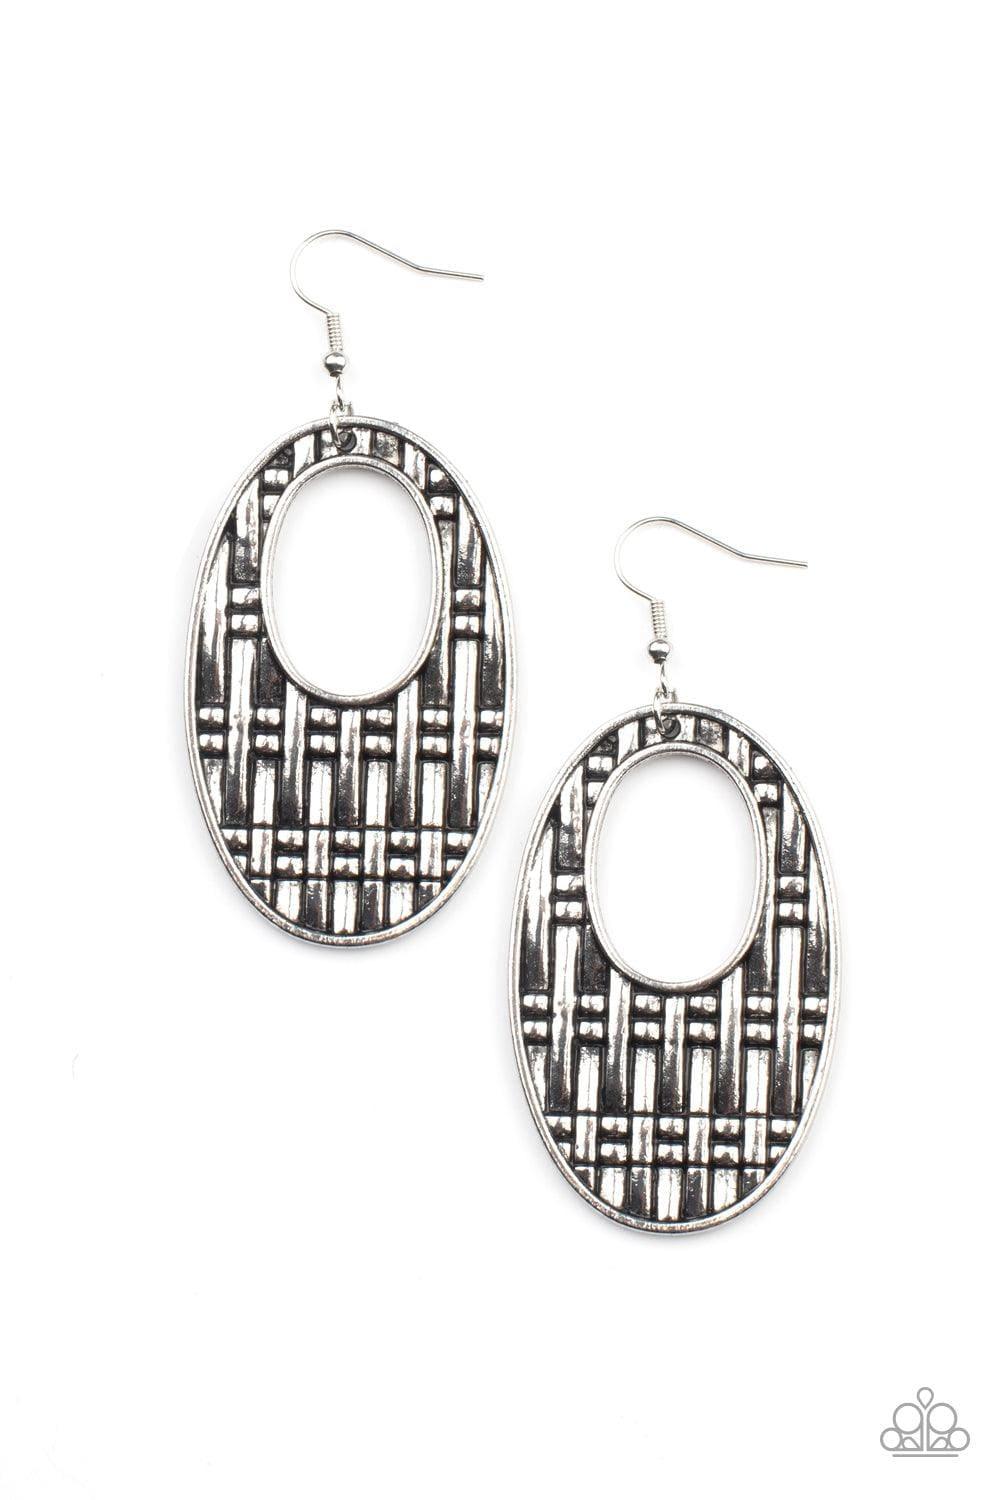 Paparazzi Accessories - Engraved Edge - Silver Earrings - Bling by JessieK